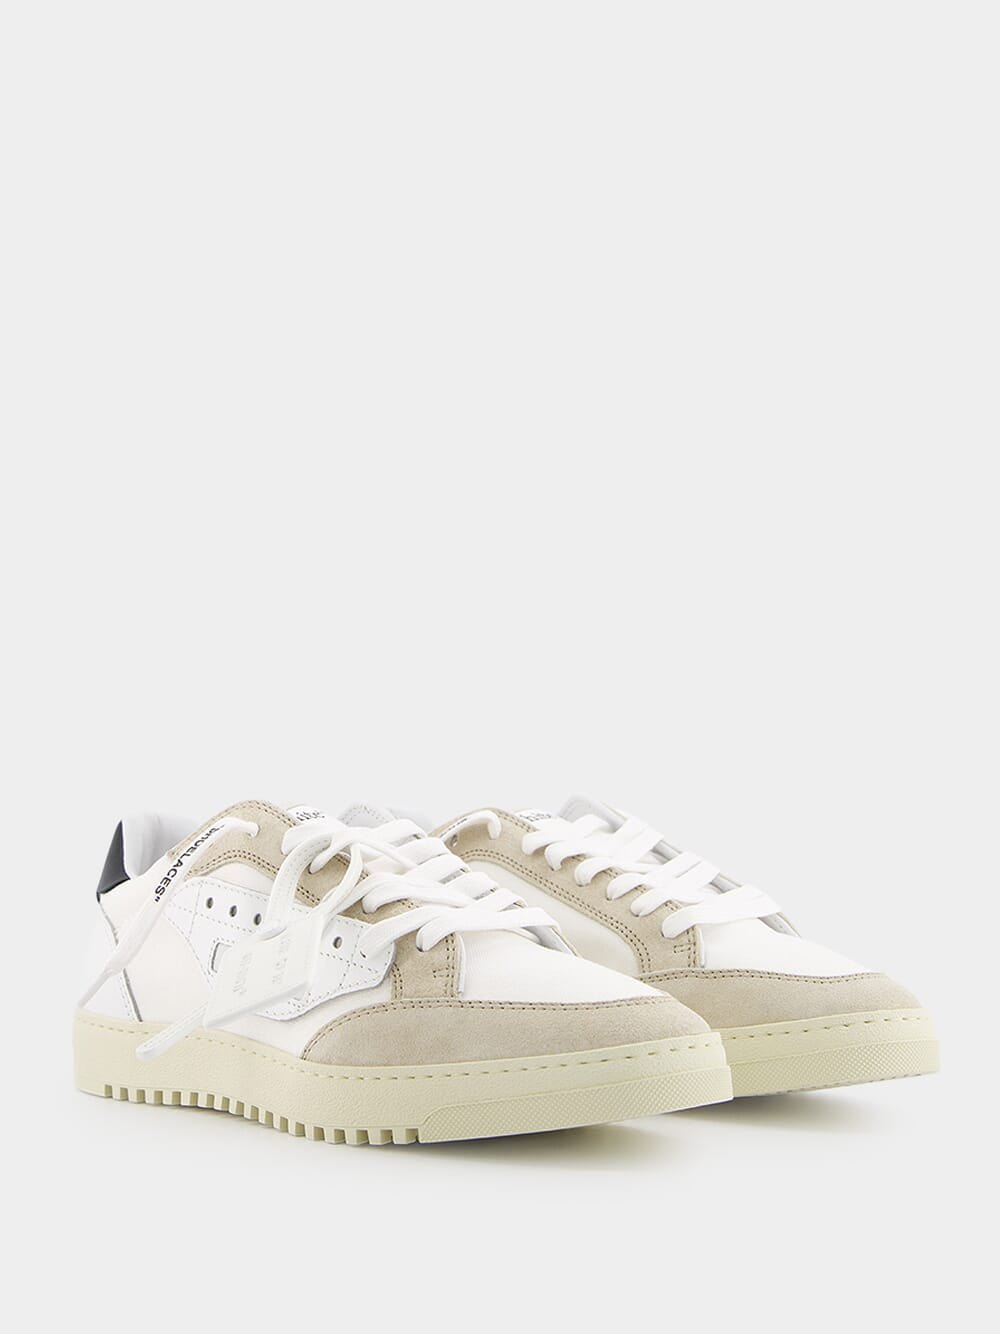 Off-White5.0 Low-Top Sneakers at Fashion Clinic